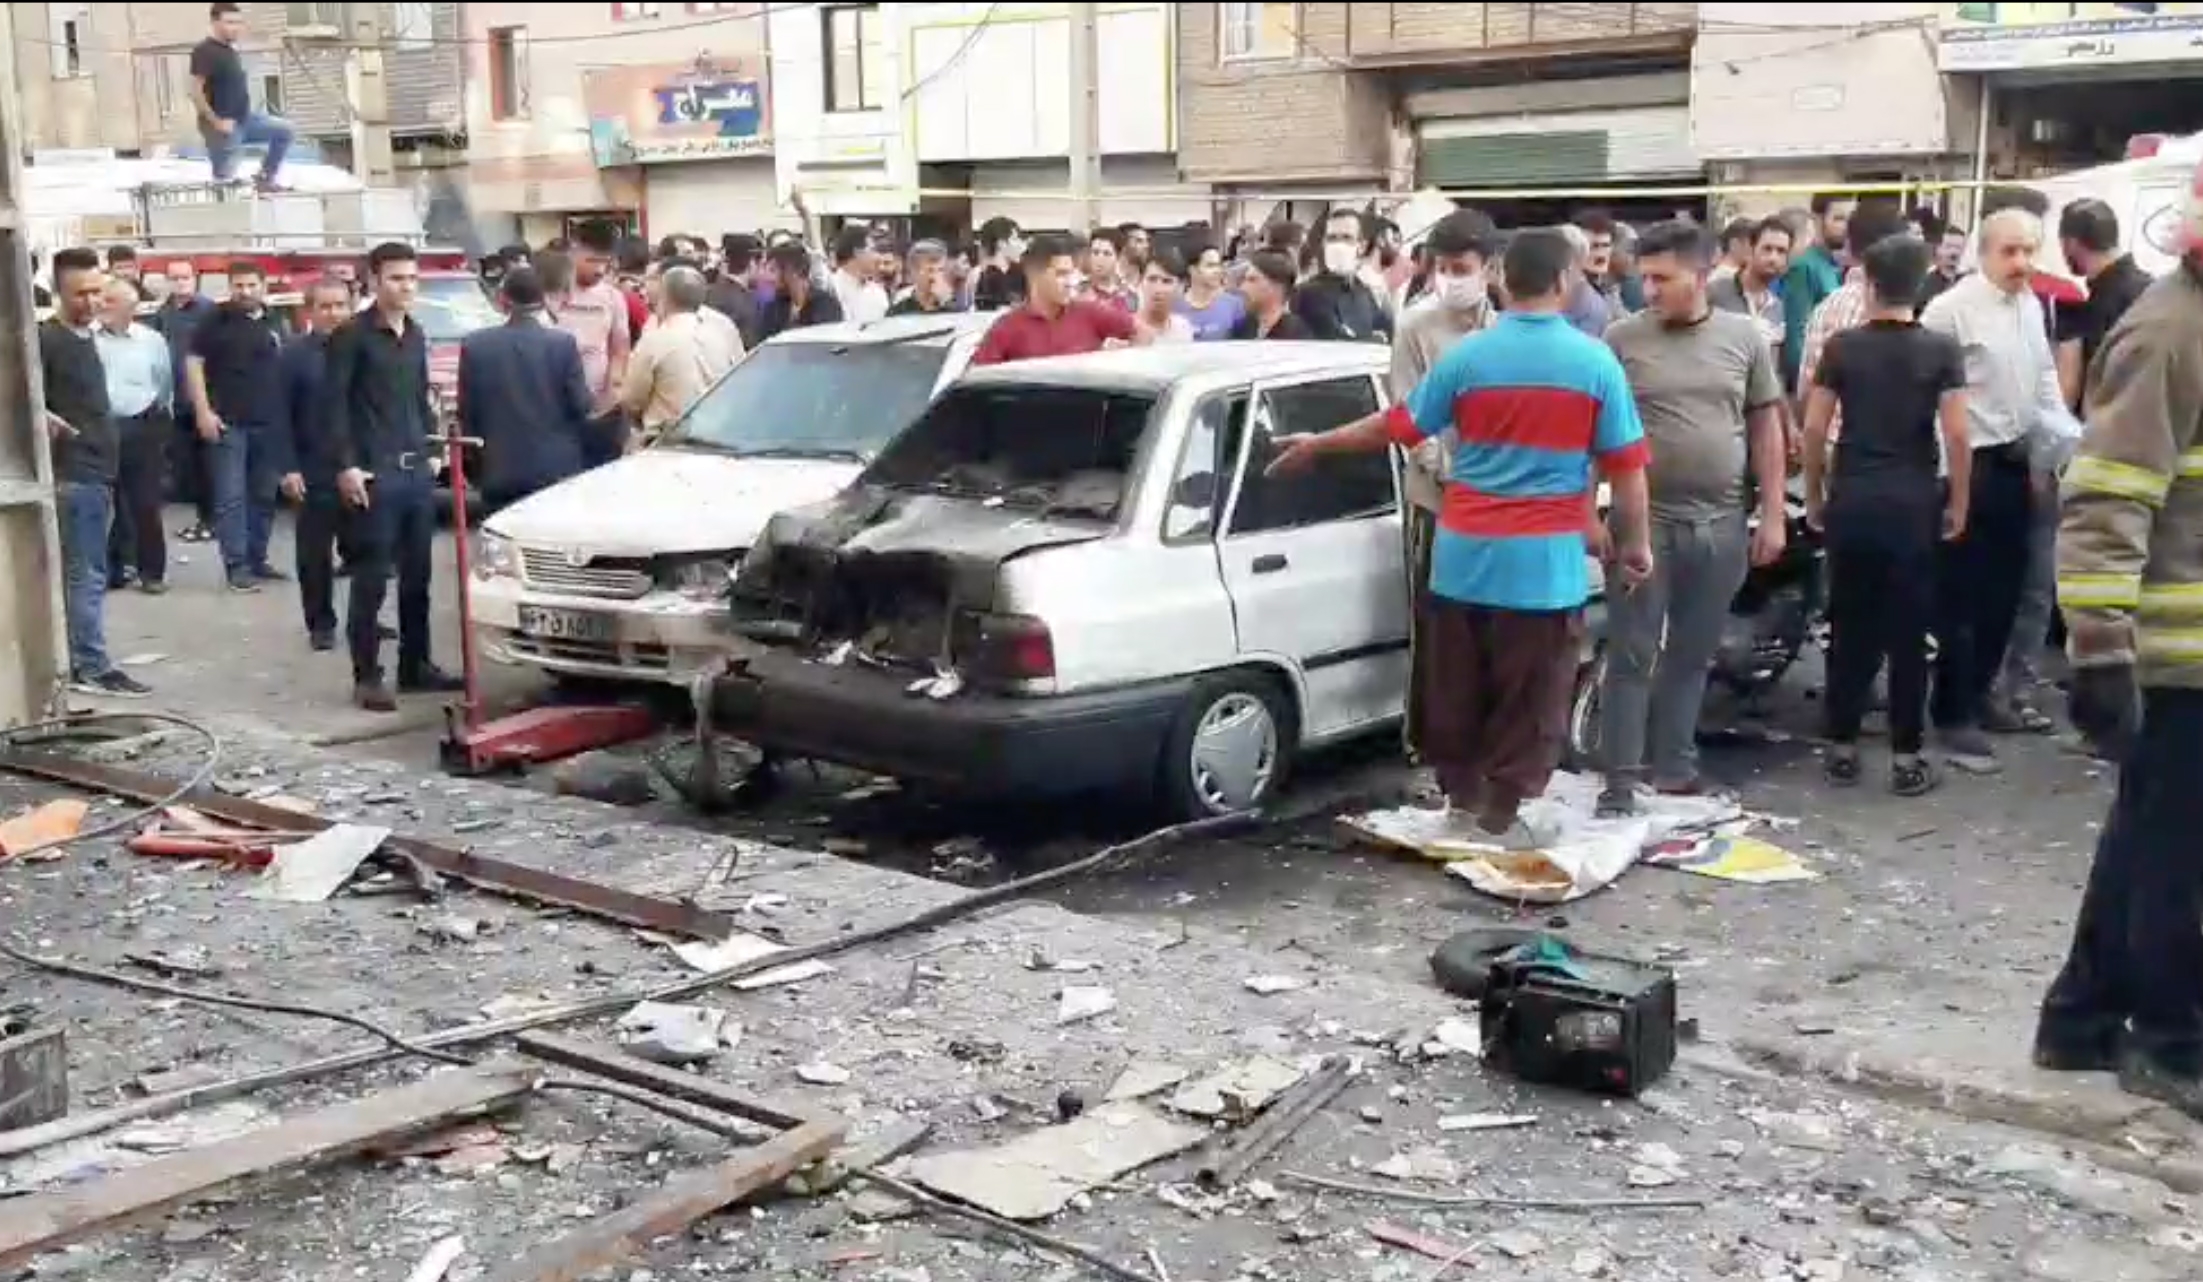 The explosion in Nasim Shahr county oustide of Tehran completely destroyed a battery workshop.